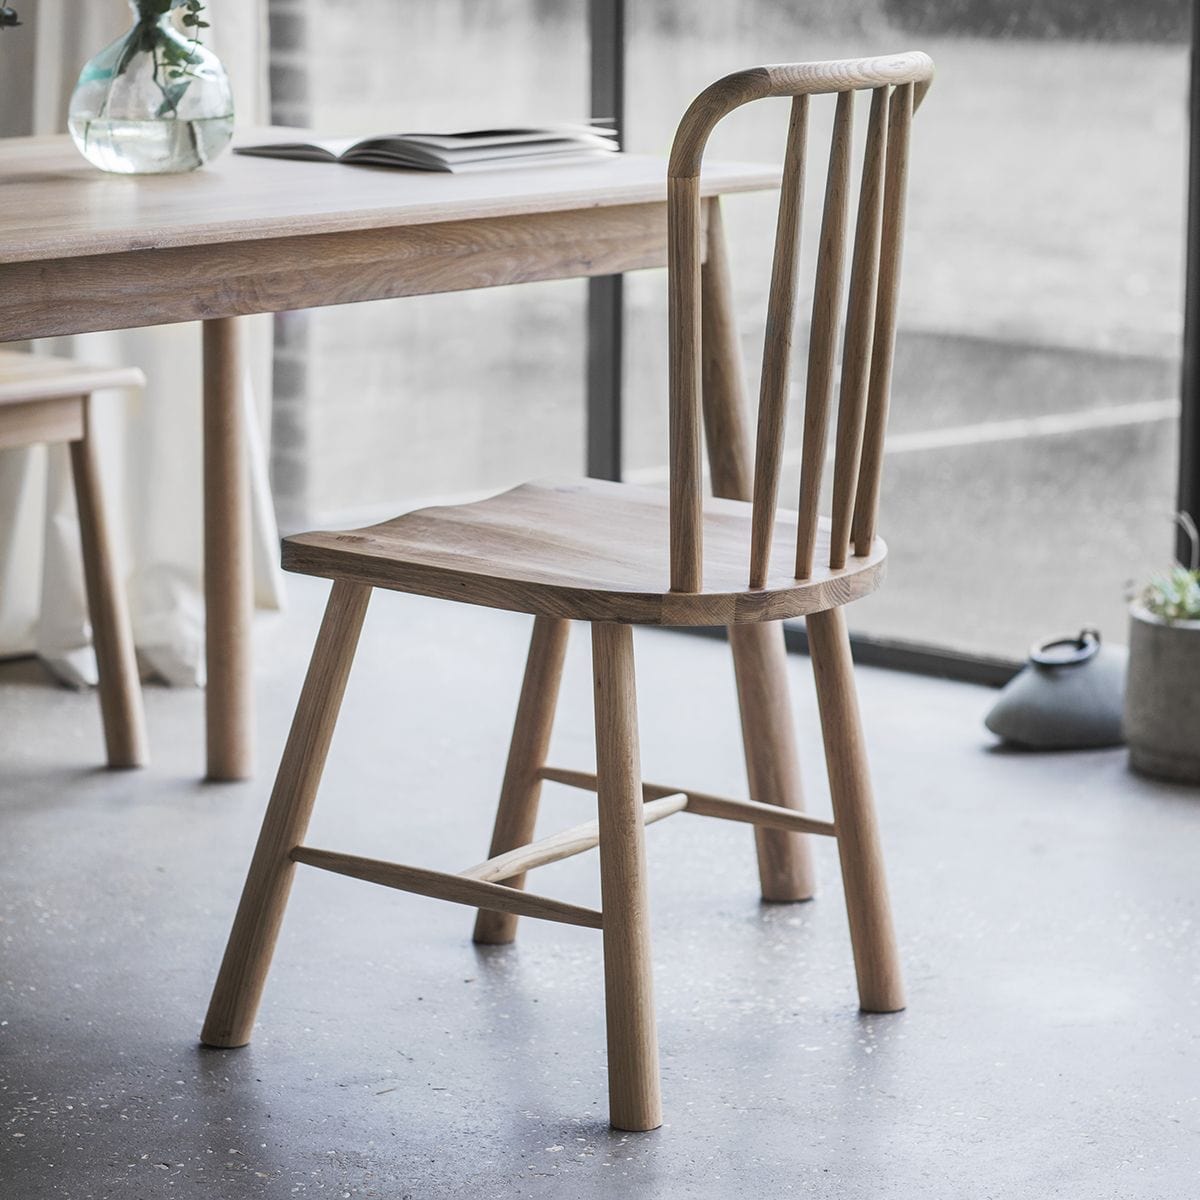 Wycombe Dining Chair (2pk)